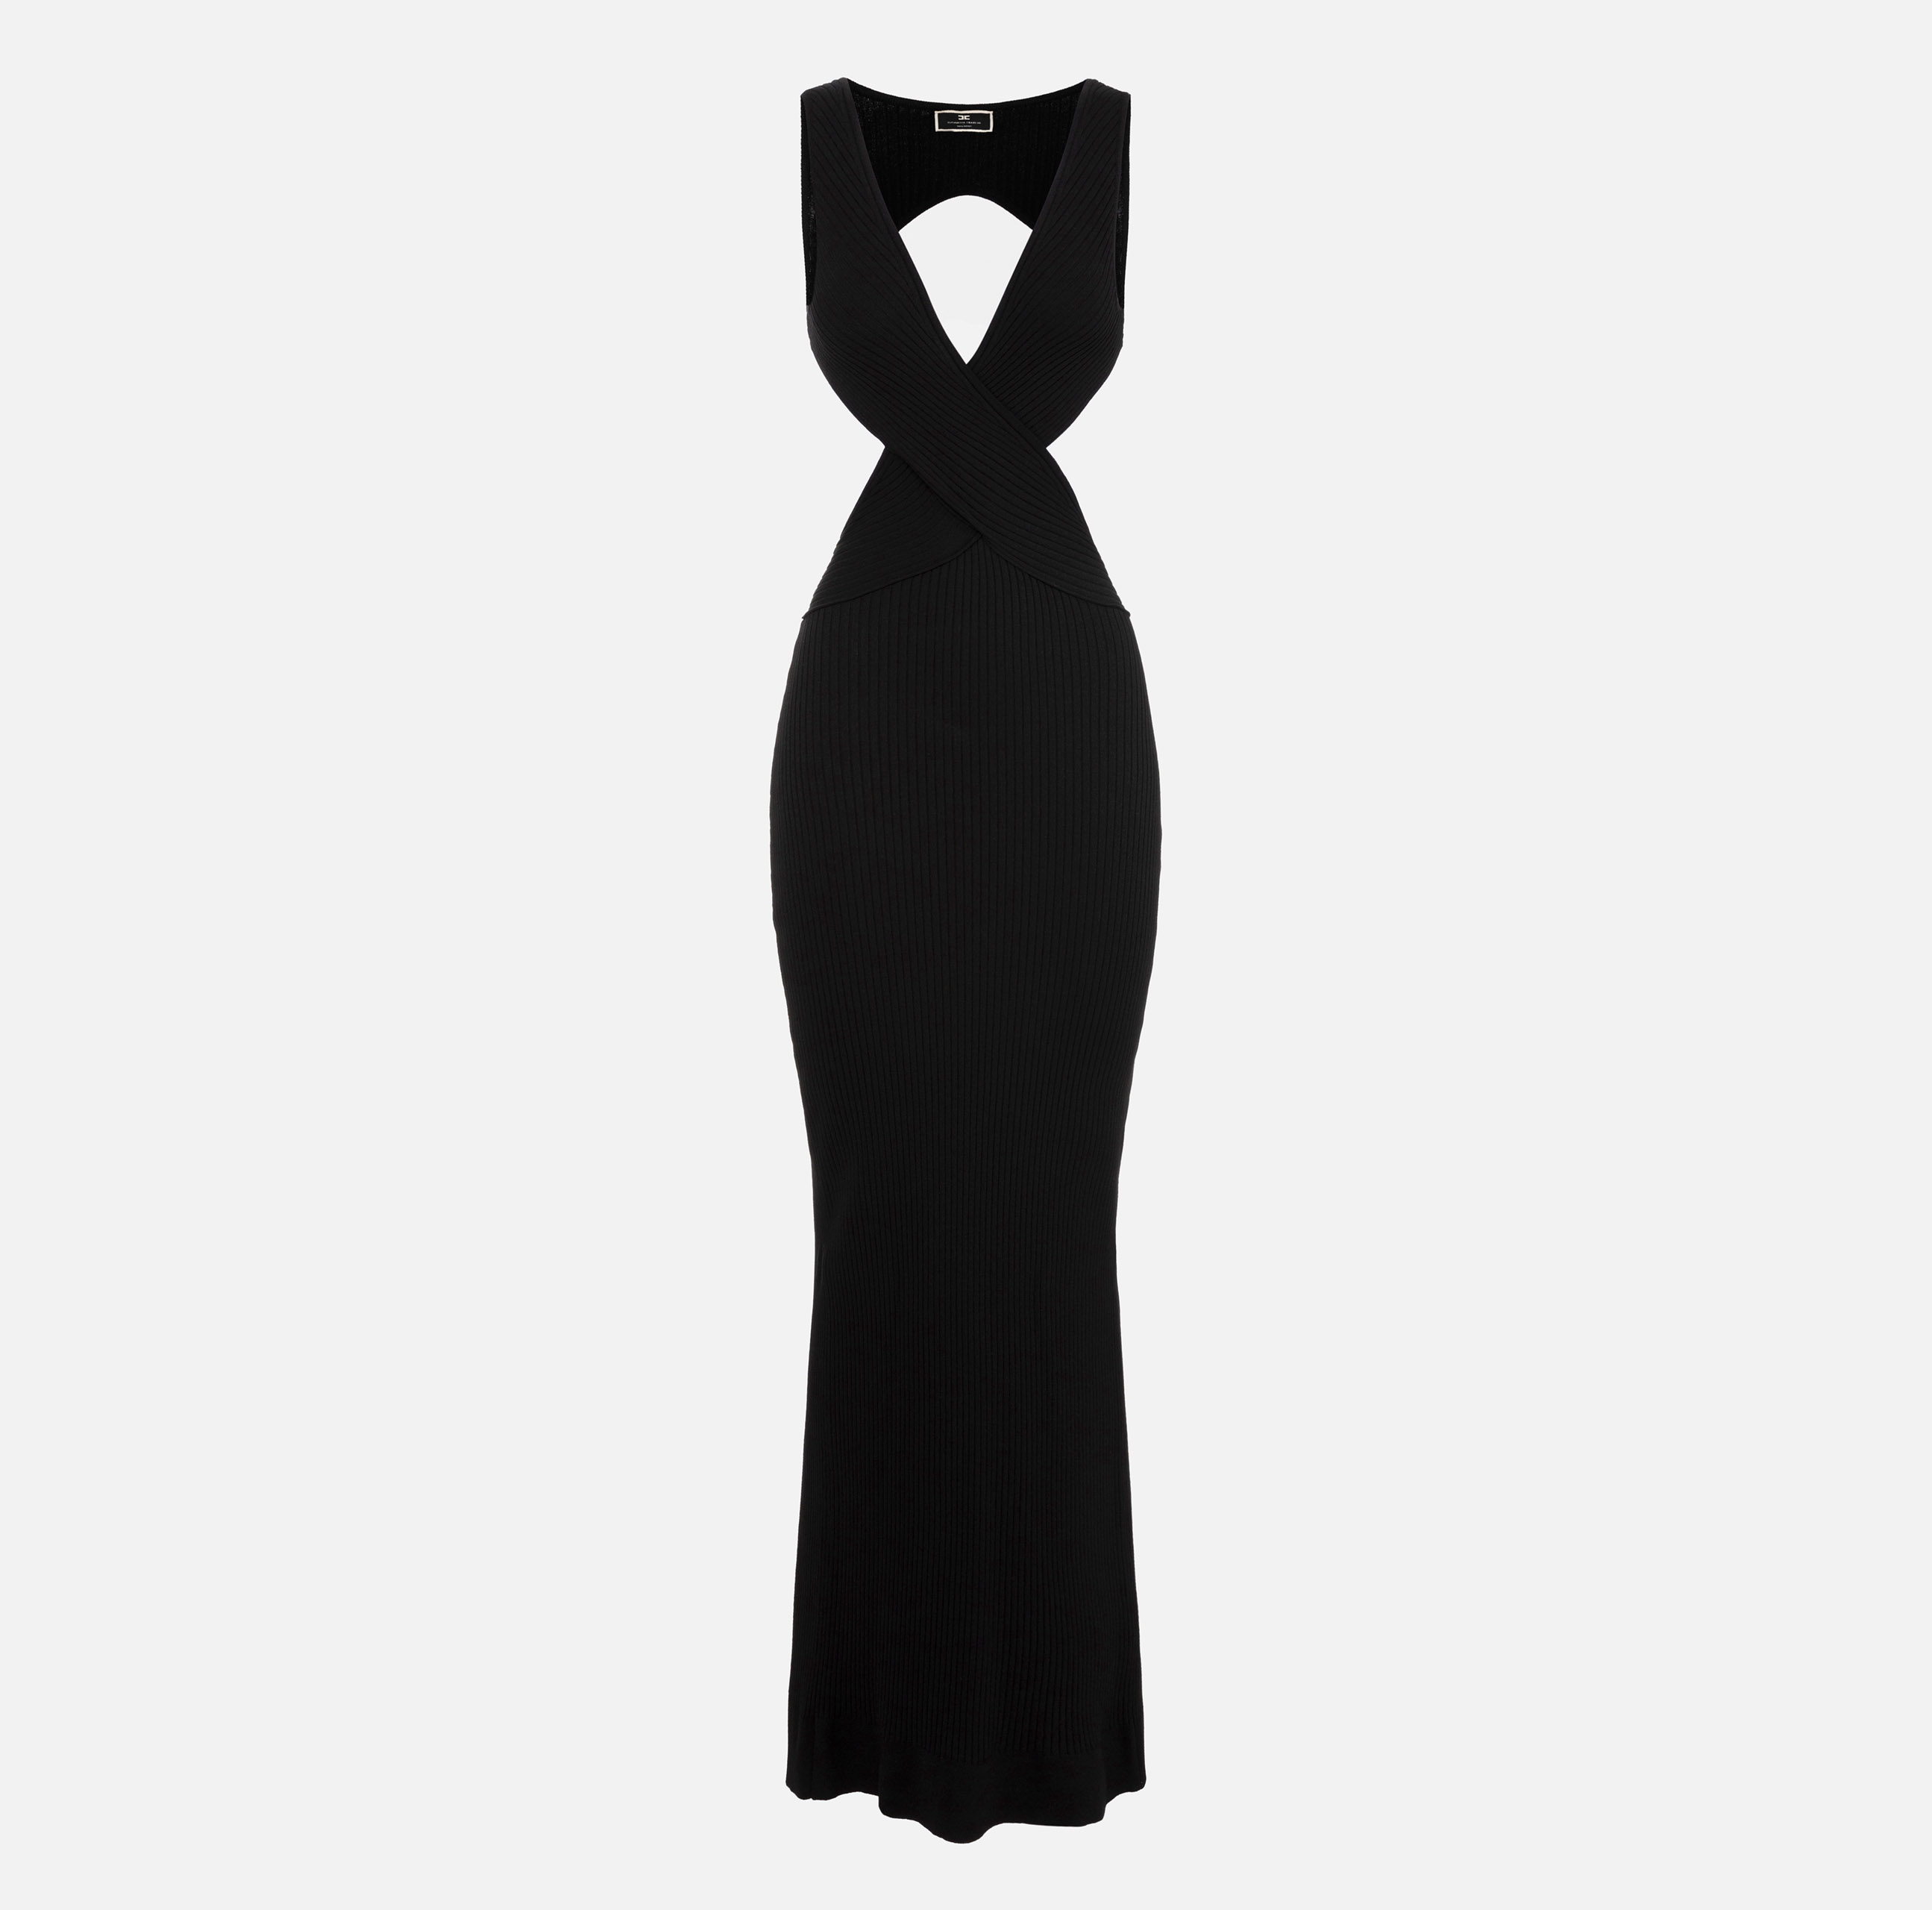 Ribbed viscose red carpet dress with back cut-out - ABBIGLIAMENTO - Elisabetta Franchi